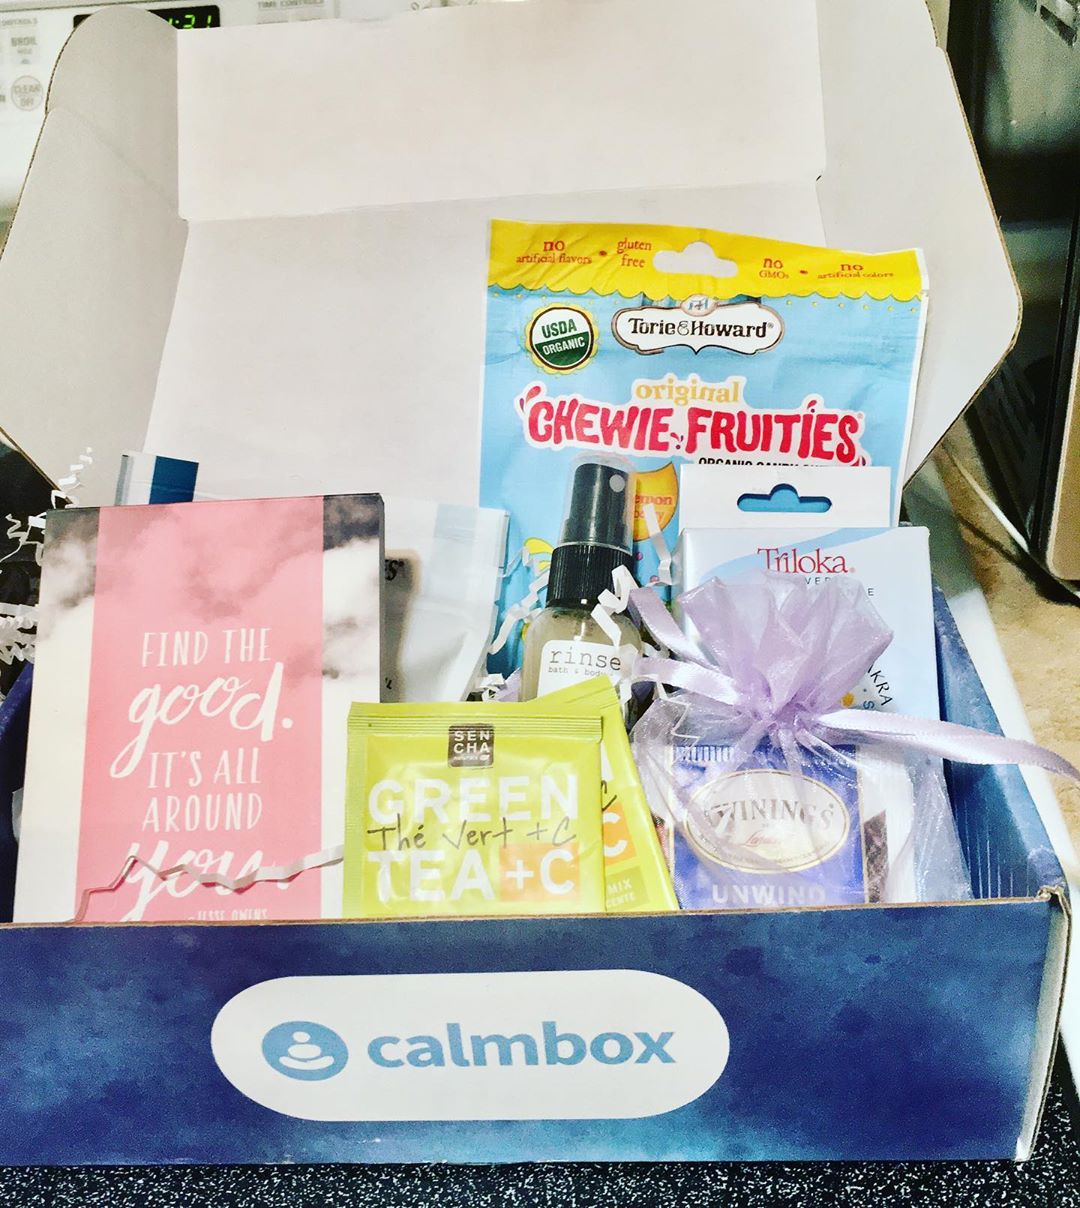 a photo of an open calmbox with items inside